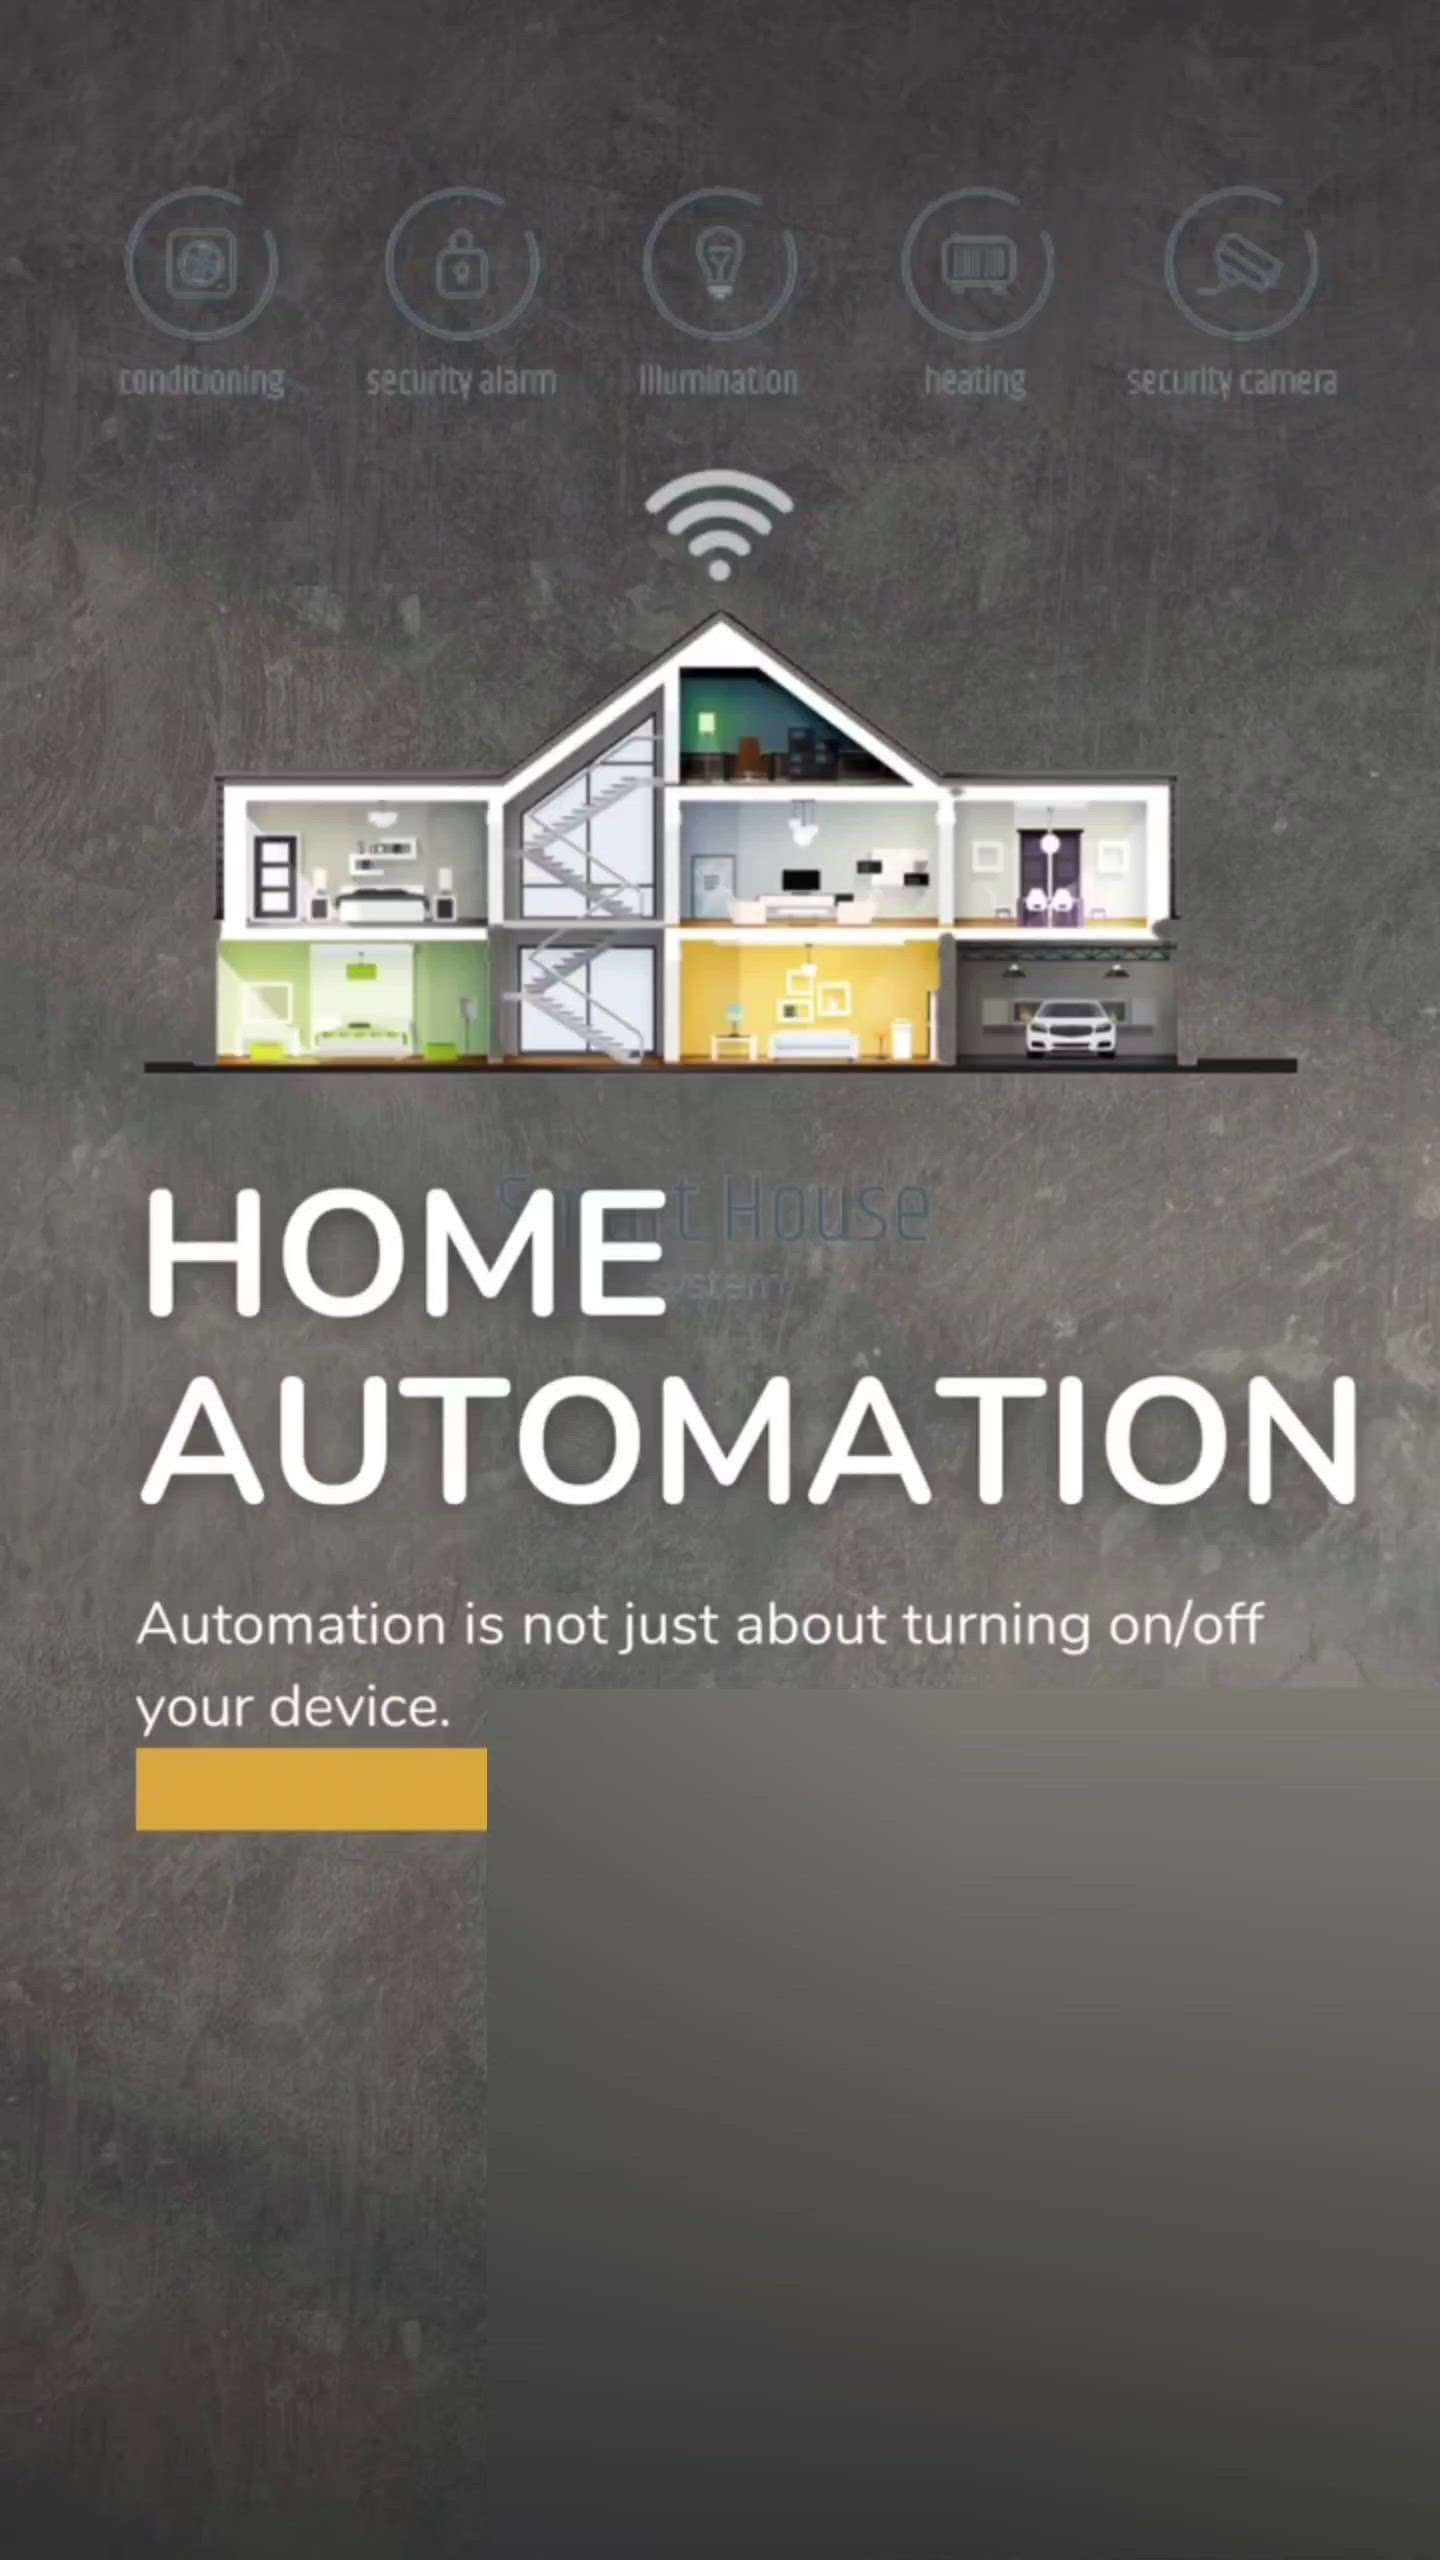 Get home automation solutions from us. 
Time has changed, now having your commands follow isnt a luxury amymore

Yes thats right have all your commands followed:
Turn on the ac,
Change the tv channel,
Turn off the lights or Close up your blinds and curtains without finding the remote or getting up.
Just say the words and have your wish be our command.

Contact us for a free demo and estimate.

#smartliving #smarthome #smartblinds #homeautomationindia #alexa #okgoogle #modularswitches #homeautomation #homedecor#automatedscenes #smartlights #smartindia #airsensor #motionsensor #royalautomation #hometheater #hometheaterexperts #hometheaterdesign #homegoals #movietime #luxurylifestyle #luxuryhomes #luxurious #dreamhome #perfecthouse #powersaving #architecture #architect #interiordesign #internetofthings